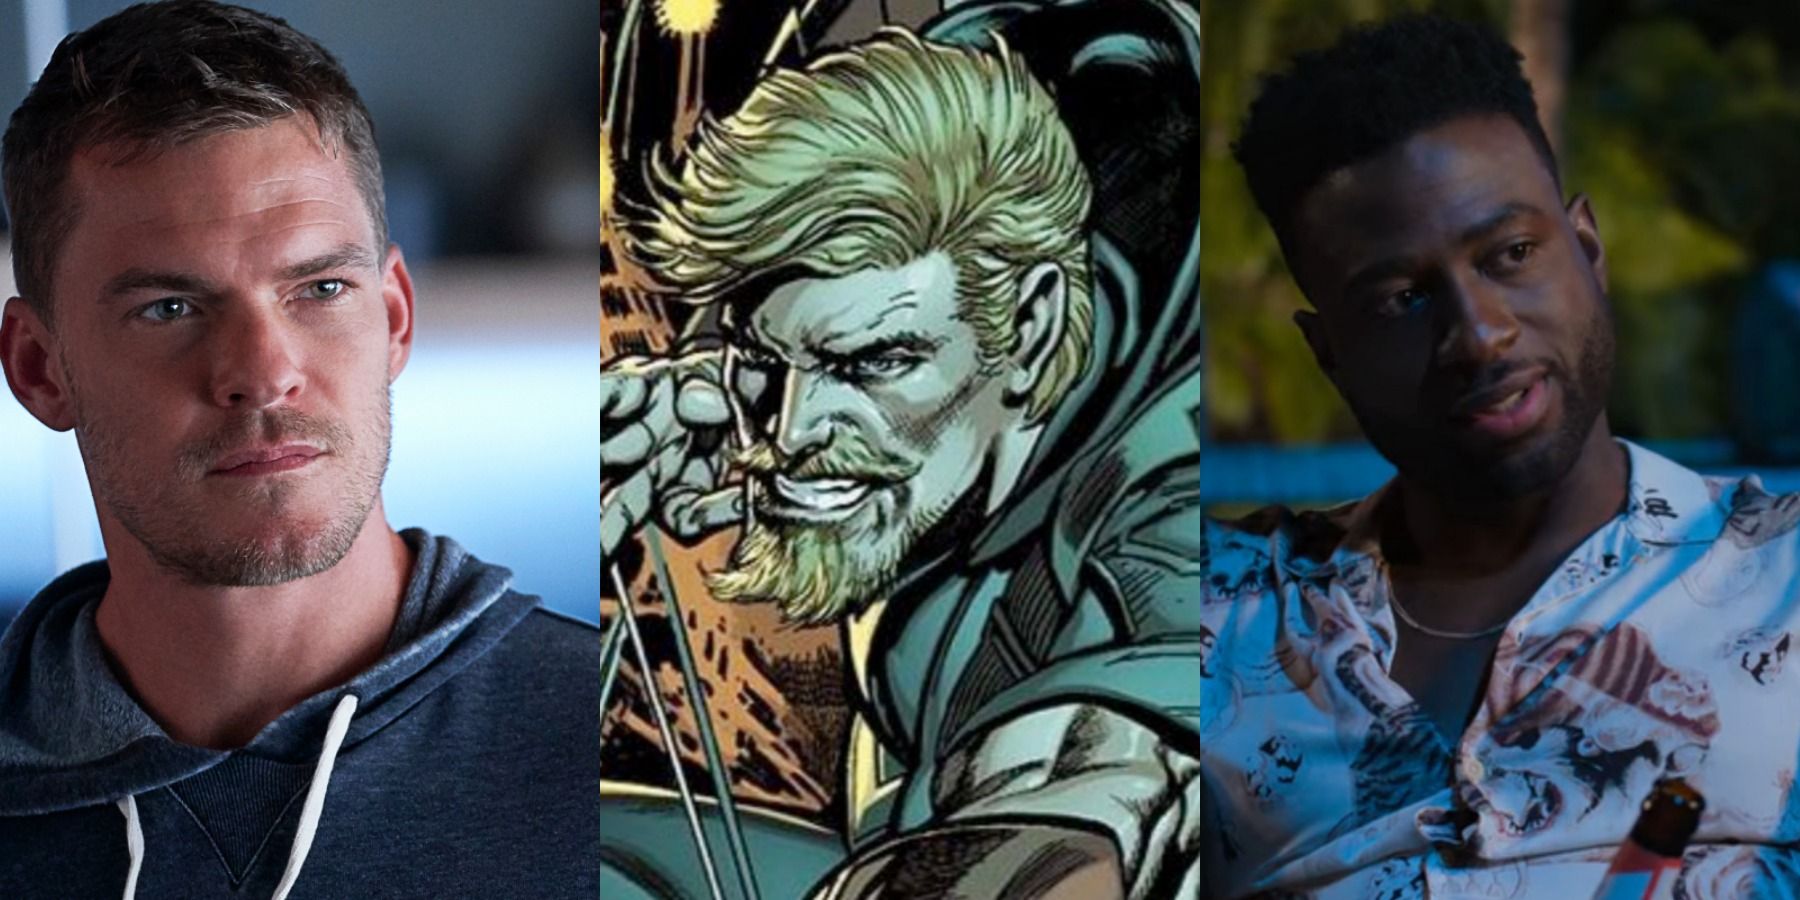 A split image depicts actors Alan Ritchson and Sinqua Walls on either side of DC character Green Arrow